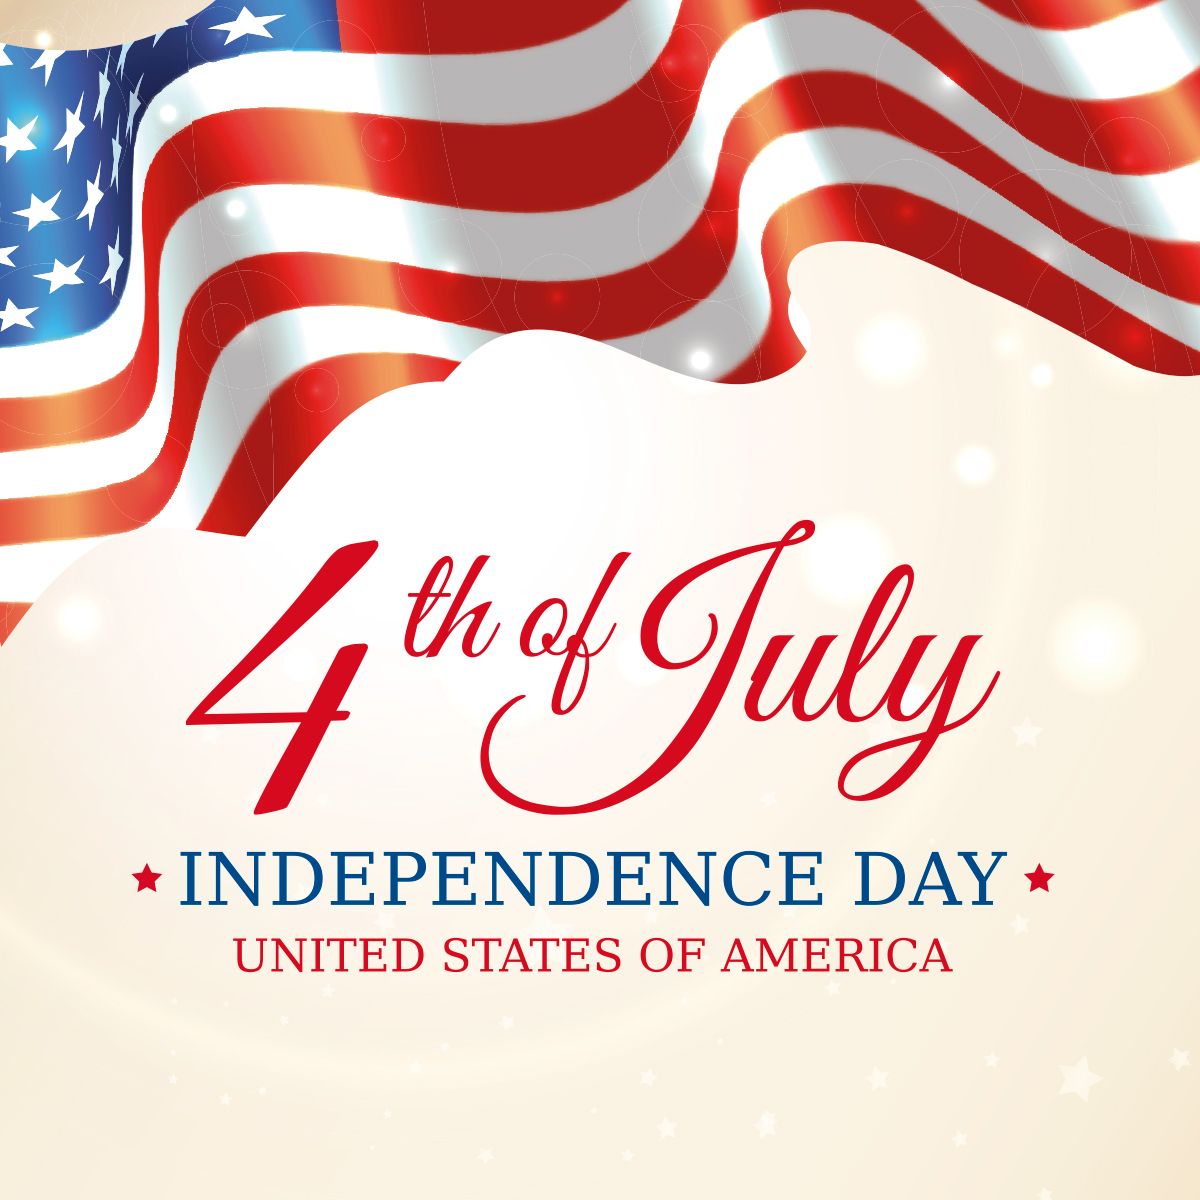 4th of July Independence day United States of America